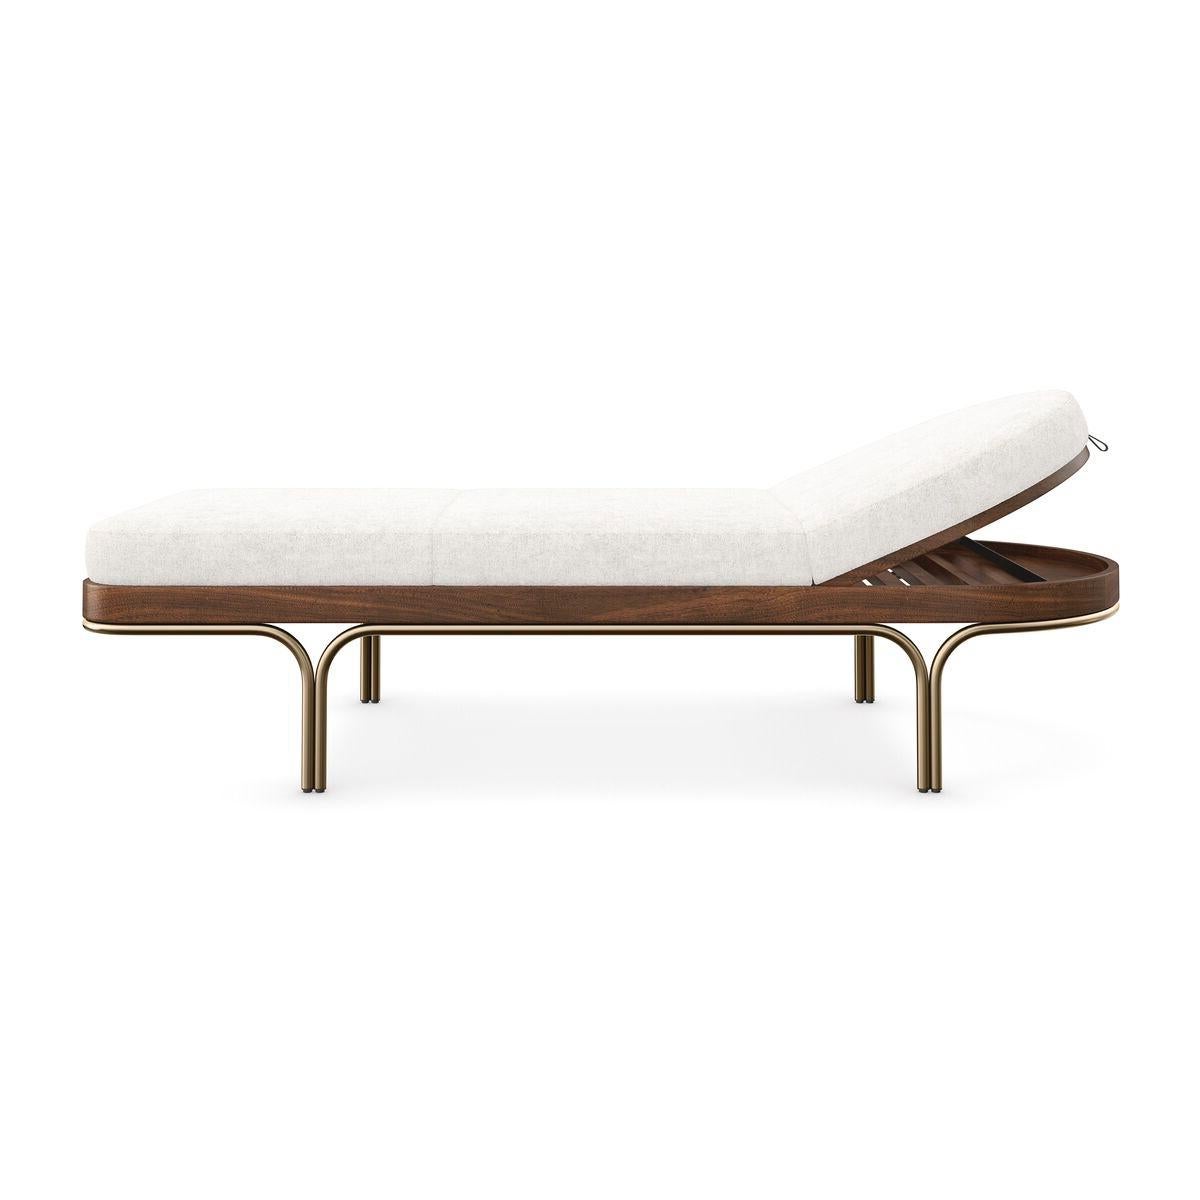 The chaise introduces a relaxed yet refined aesthetic to living interiors. Covered in a soft, wool-like fabric with a sleek base in Natural Walnut and Lucent Bronze Metallic paint.

Take note: the headboard pivots from sleep to recline position for